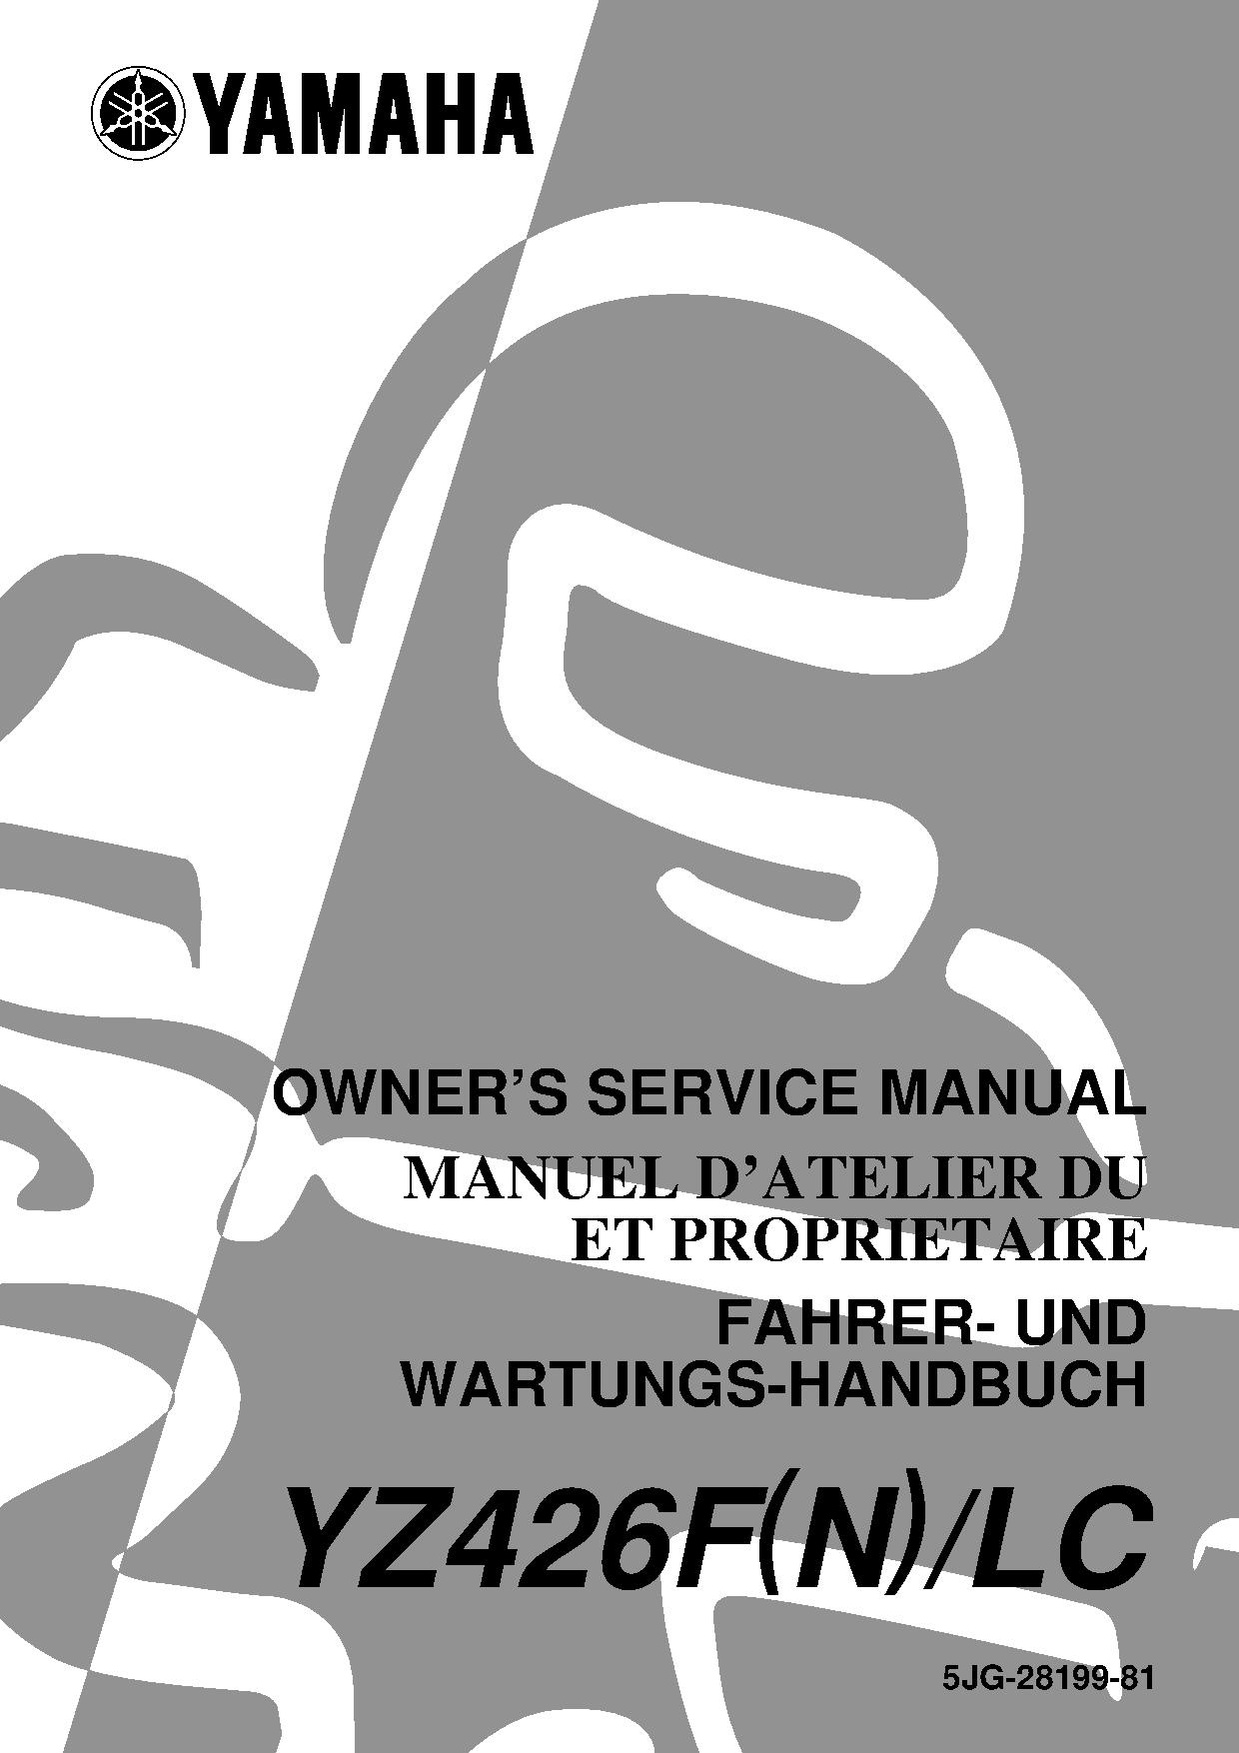 File:2001 Yamaha YZ426F (N) LC Owners Service Manual.pdf